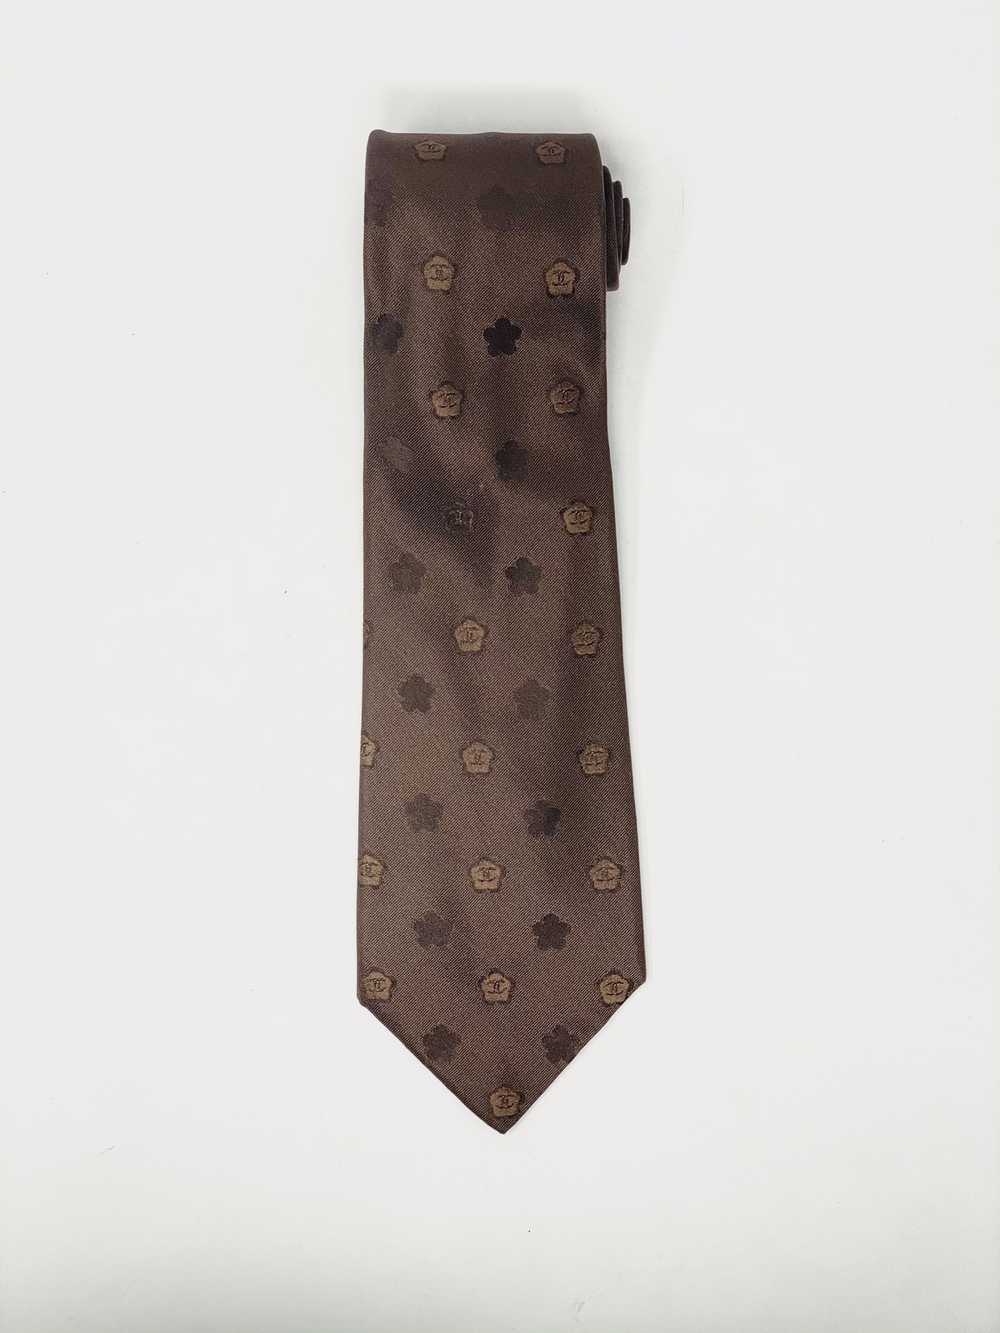 Chanel Chanel Neck Tie Brown Cherry Blossoms - image 1